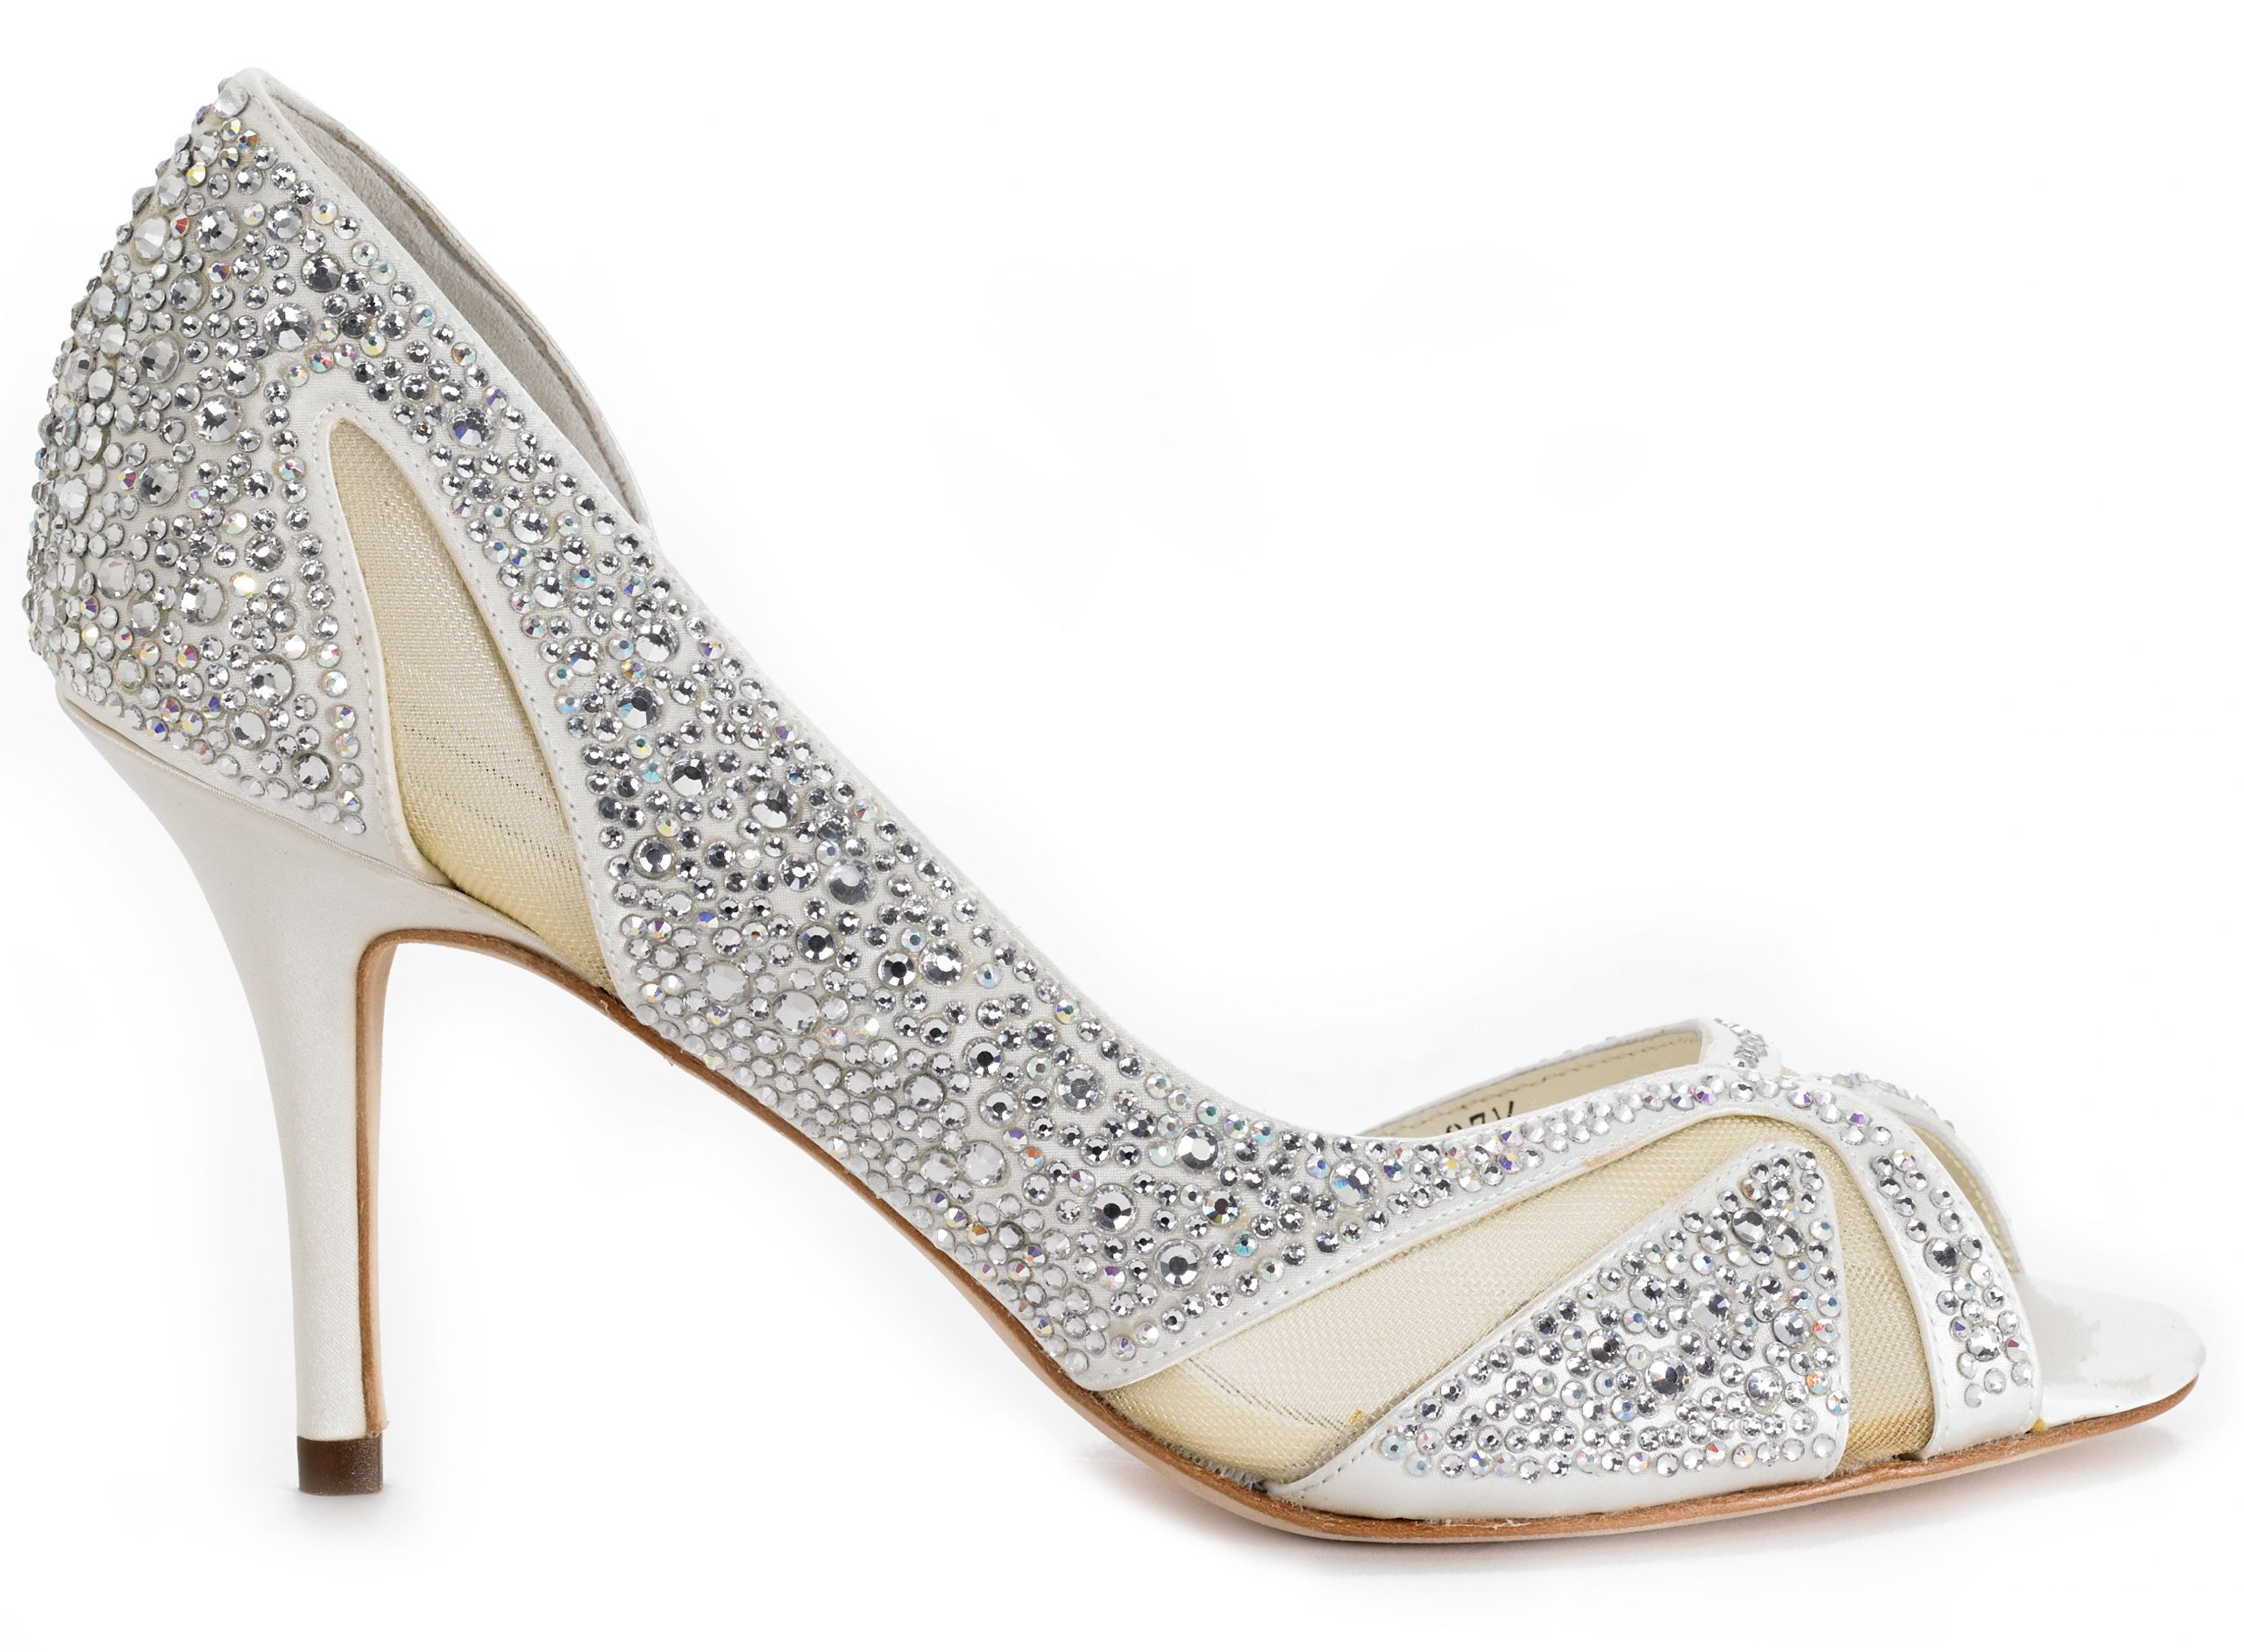 Wedding Shoes For The Bride
 Choose The Perfect Wedding Shoes For Bride